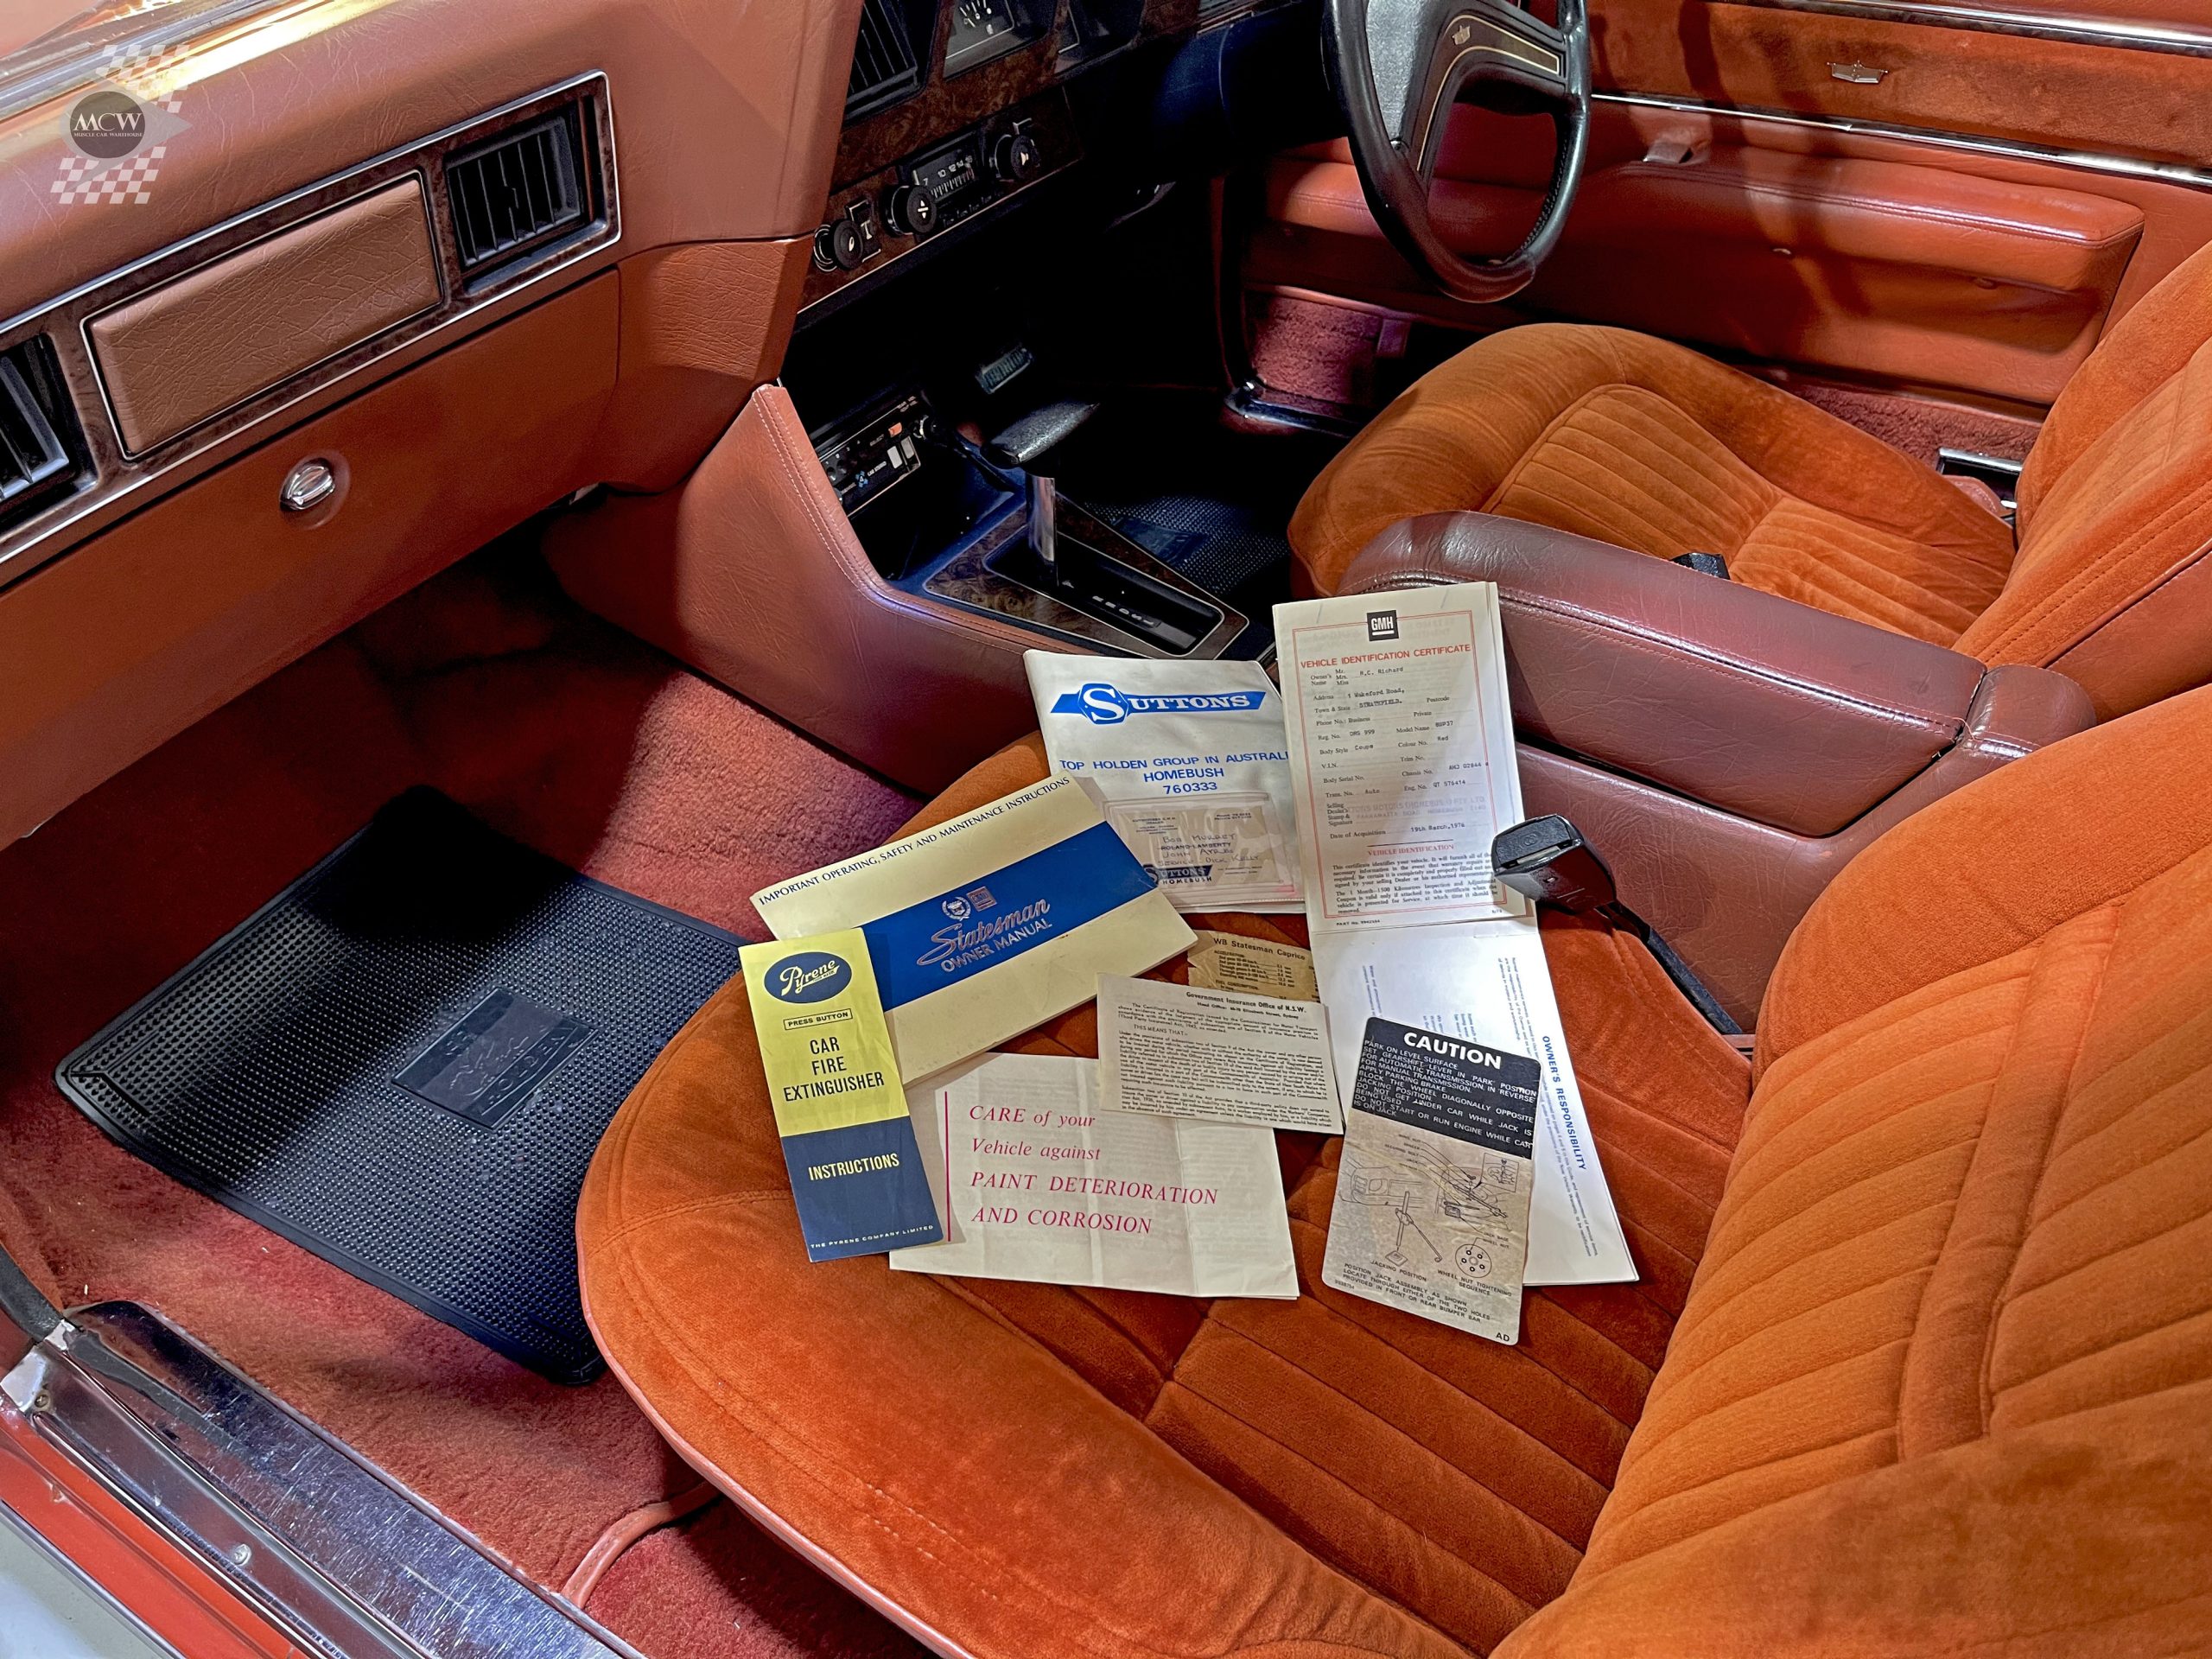 1976 Holden HJ Statesman Caprice Coupe Interior - Muscle Car Warehouse